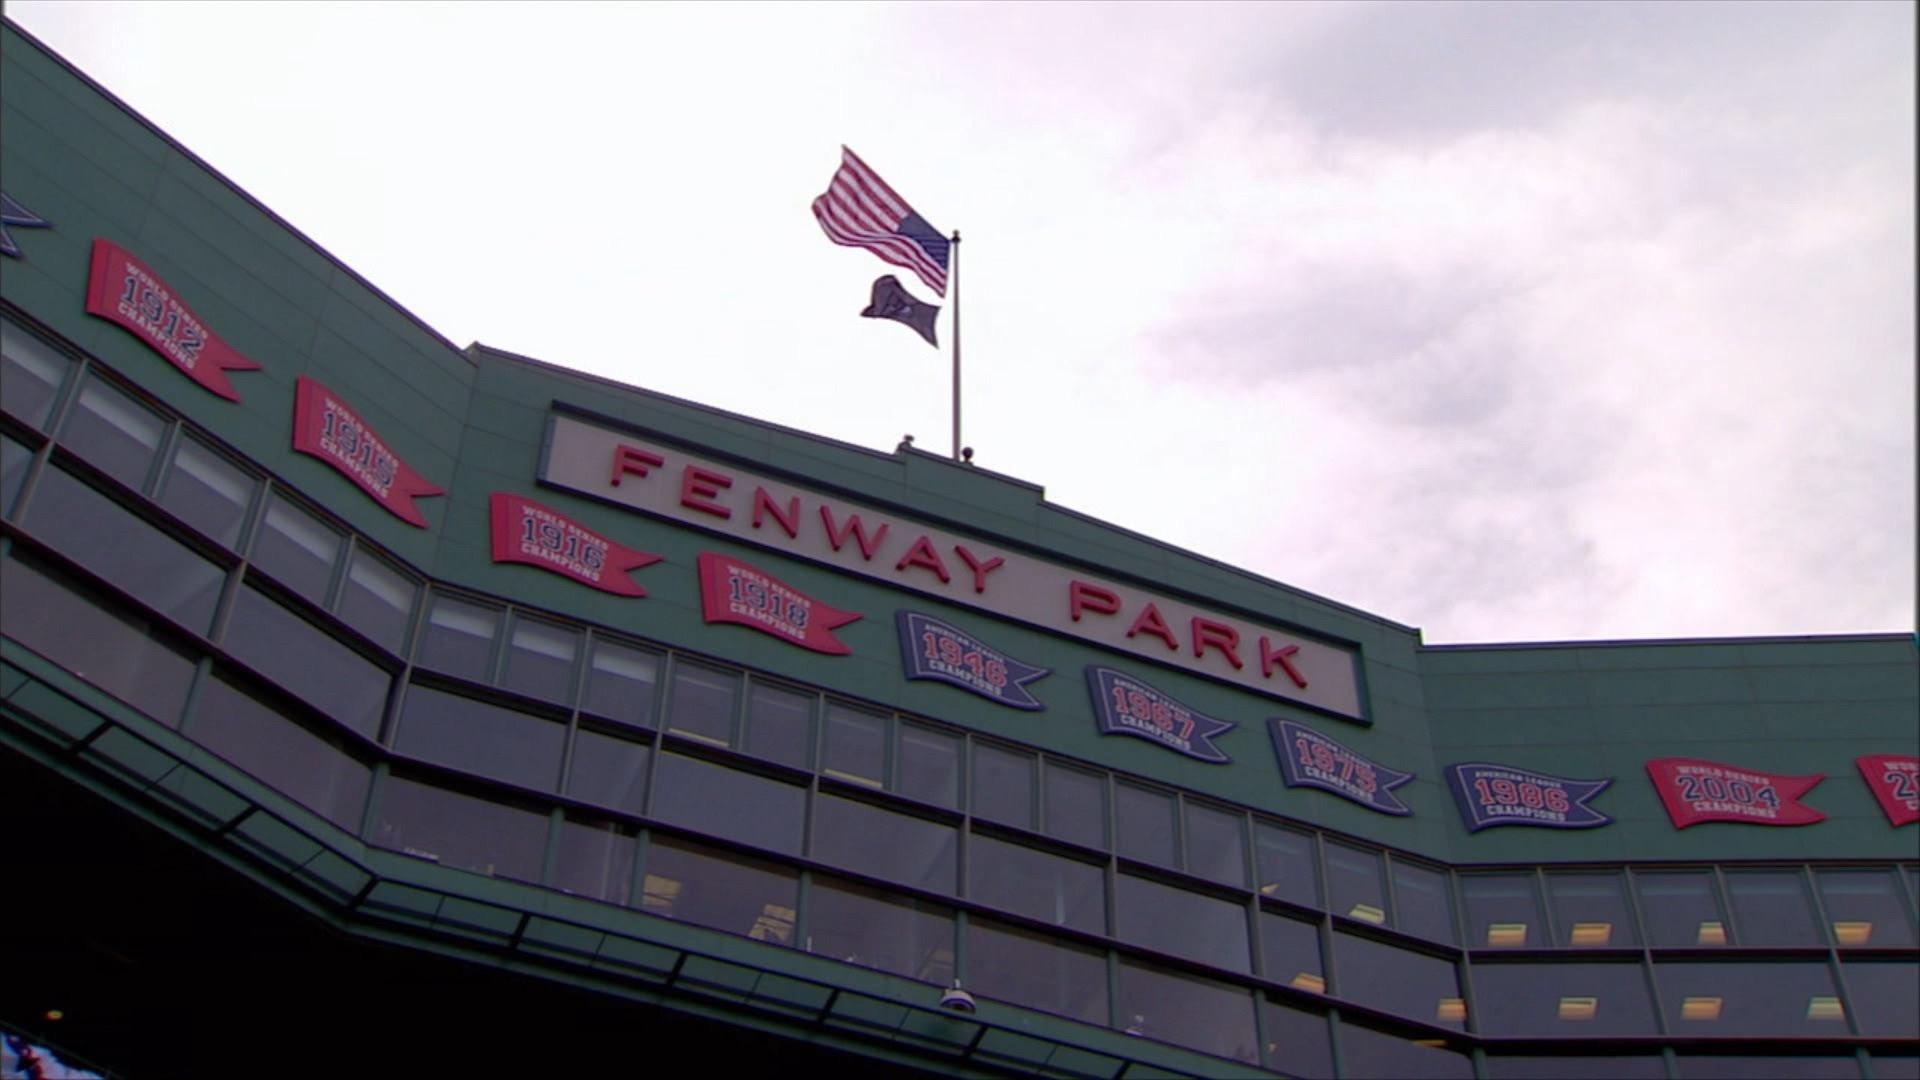 Red Sox want to do away with 'racist' legacy of famed Yawkey Way